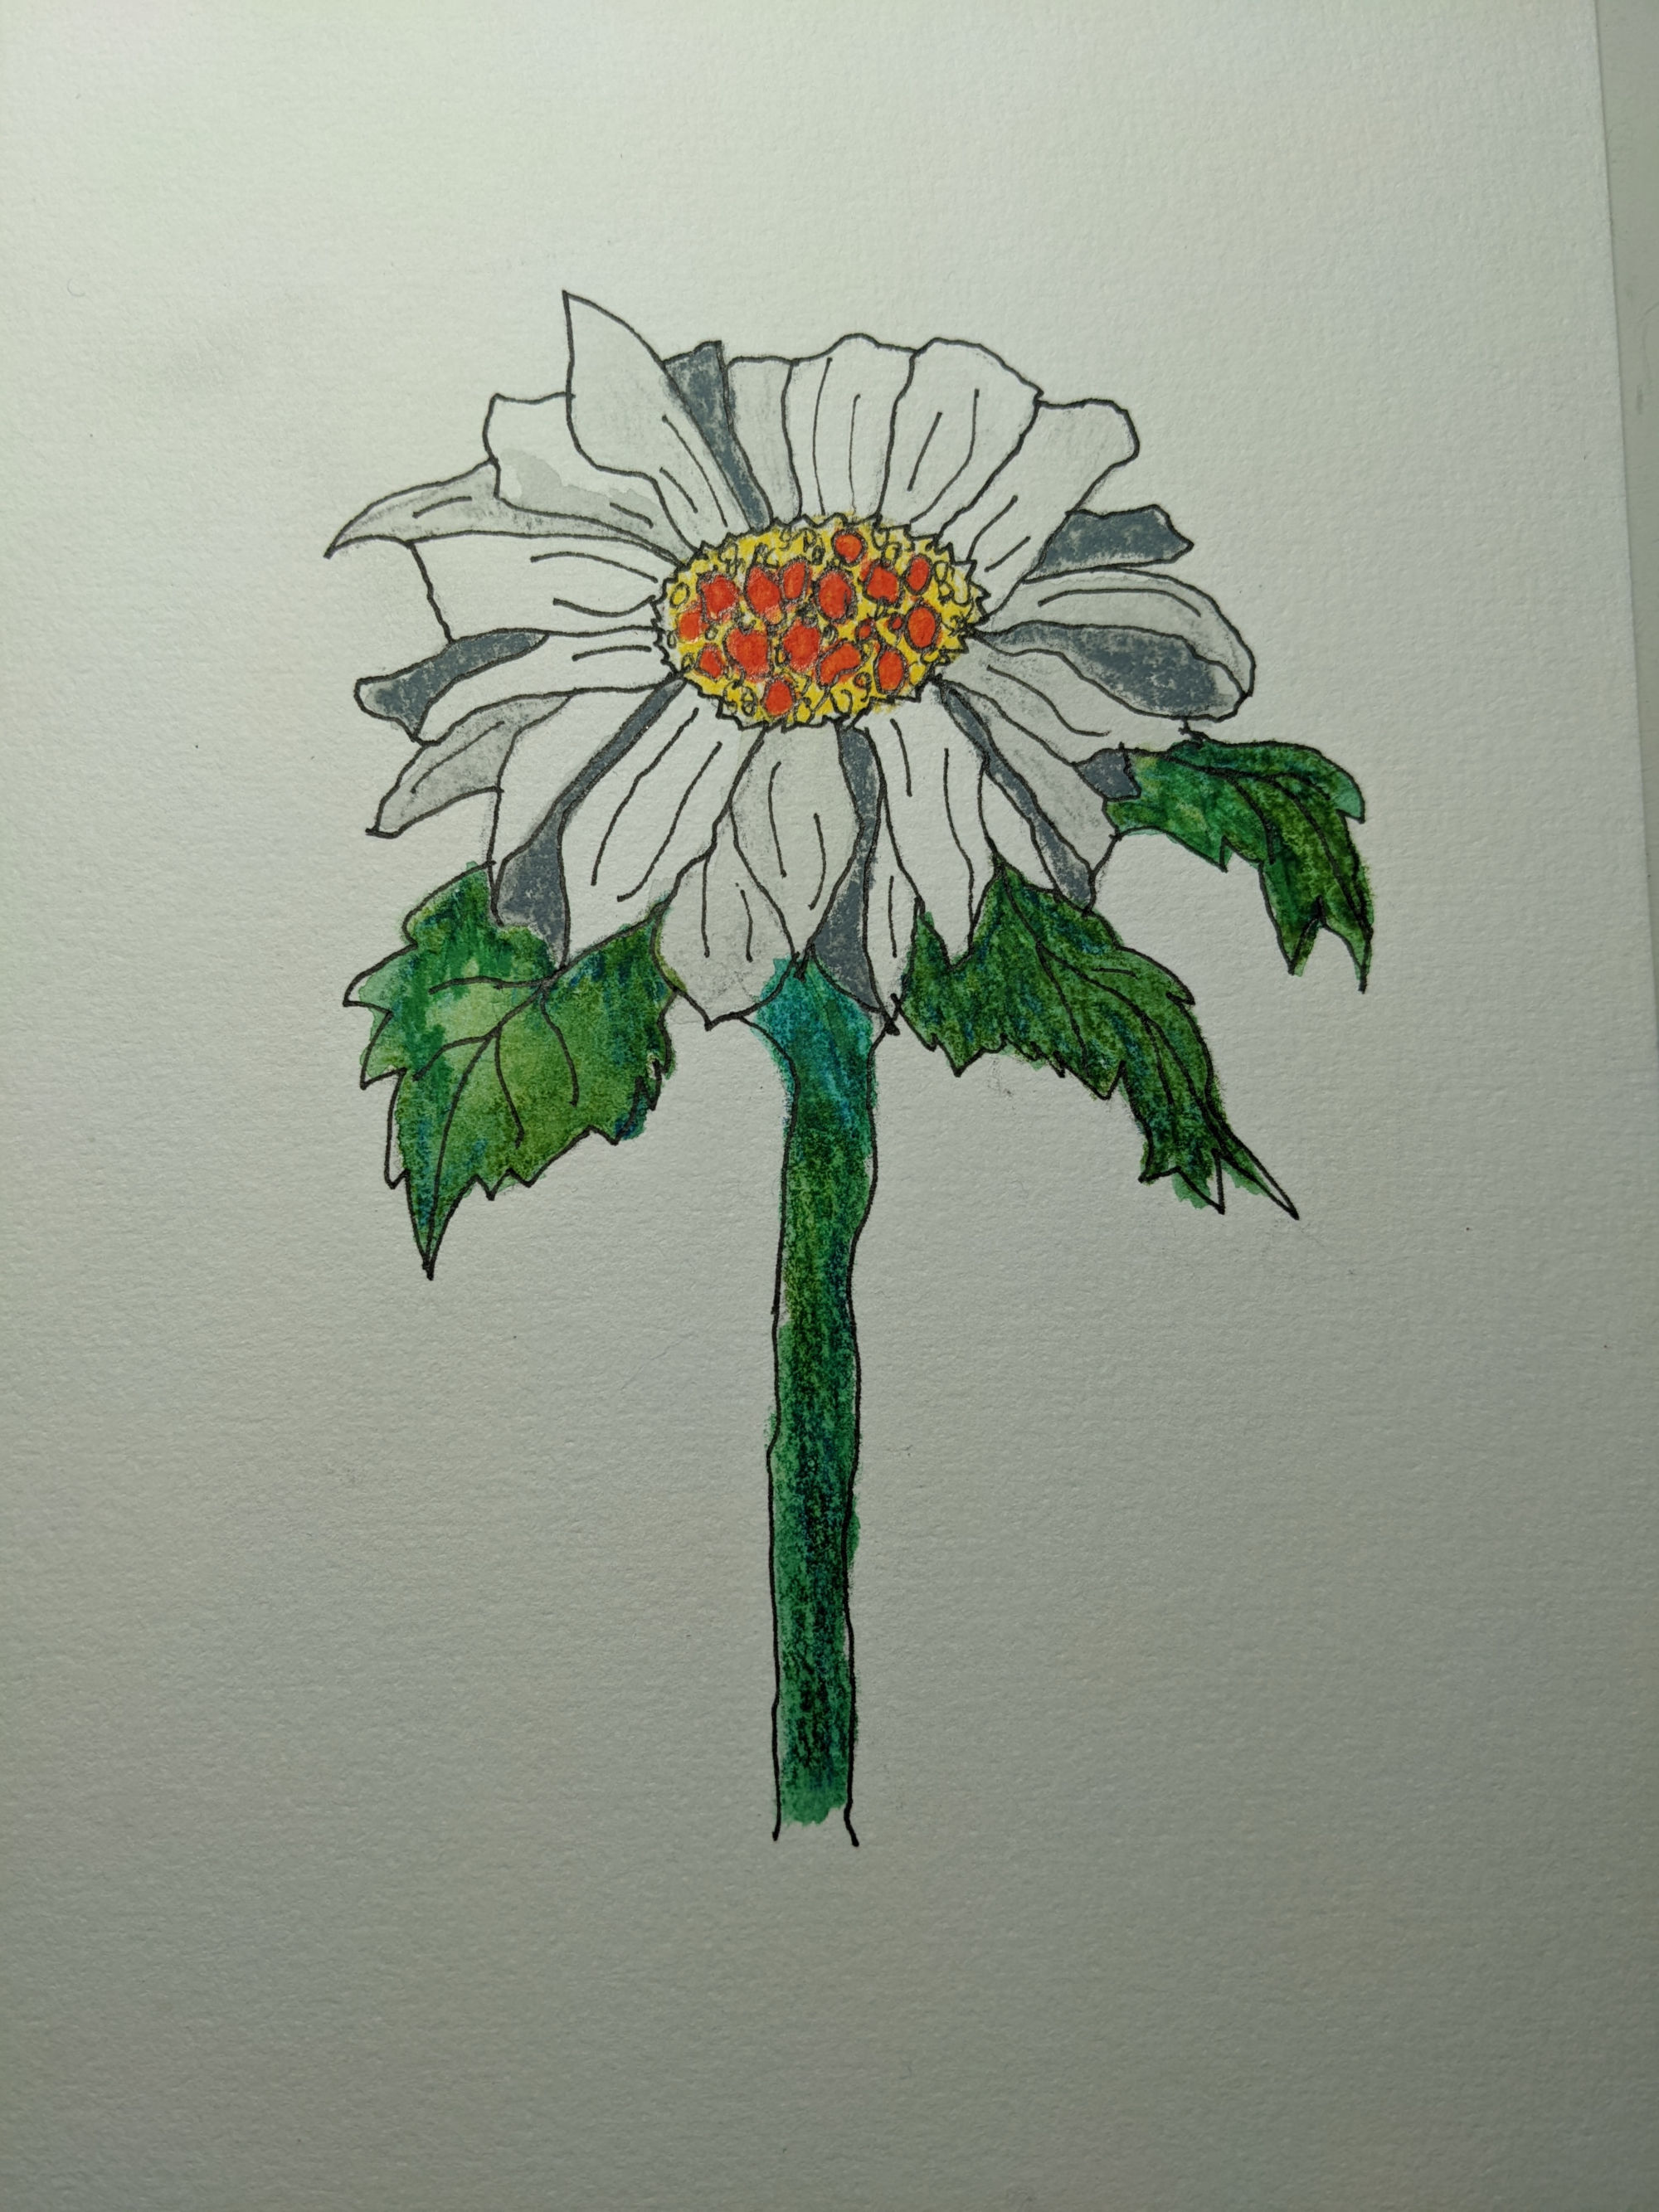 abstract flower made with watercolor pencils & ink